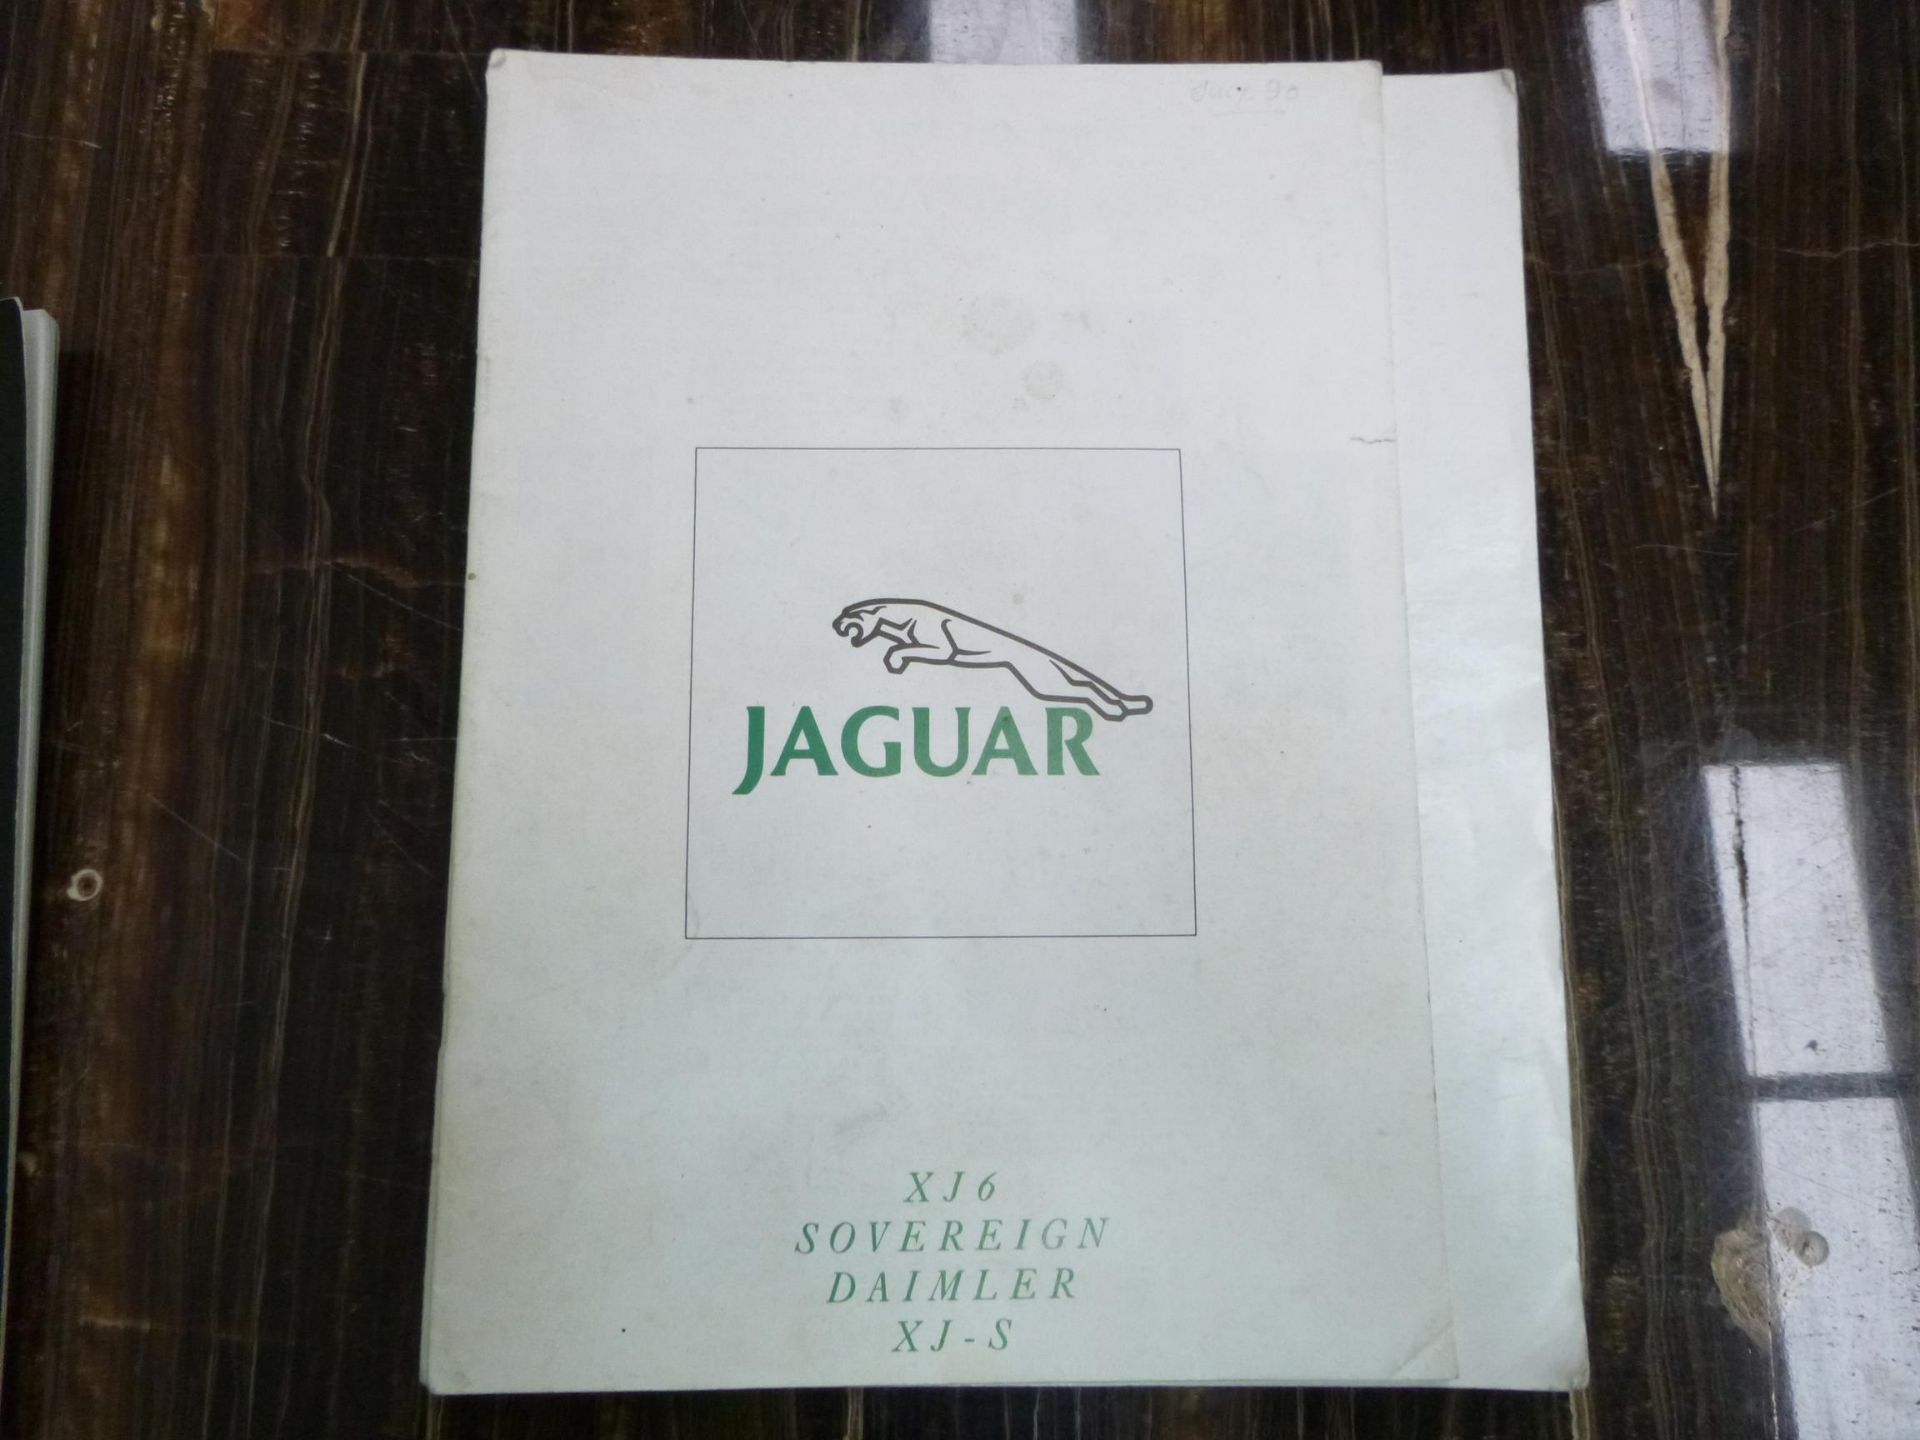 Jaguar Car Collection Brochures to include :- XJ6 Sovereign Daimler, XJ-S ''The New XJ Series, - Image 3 of 3